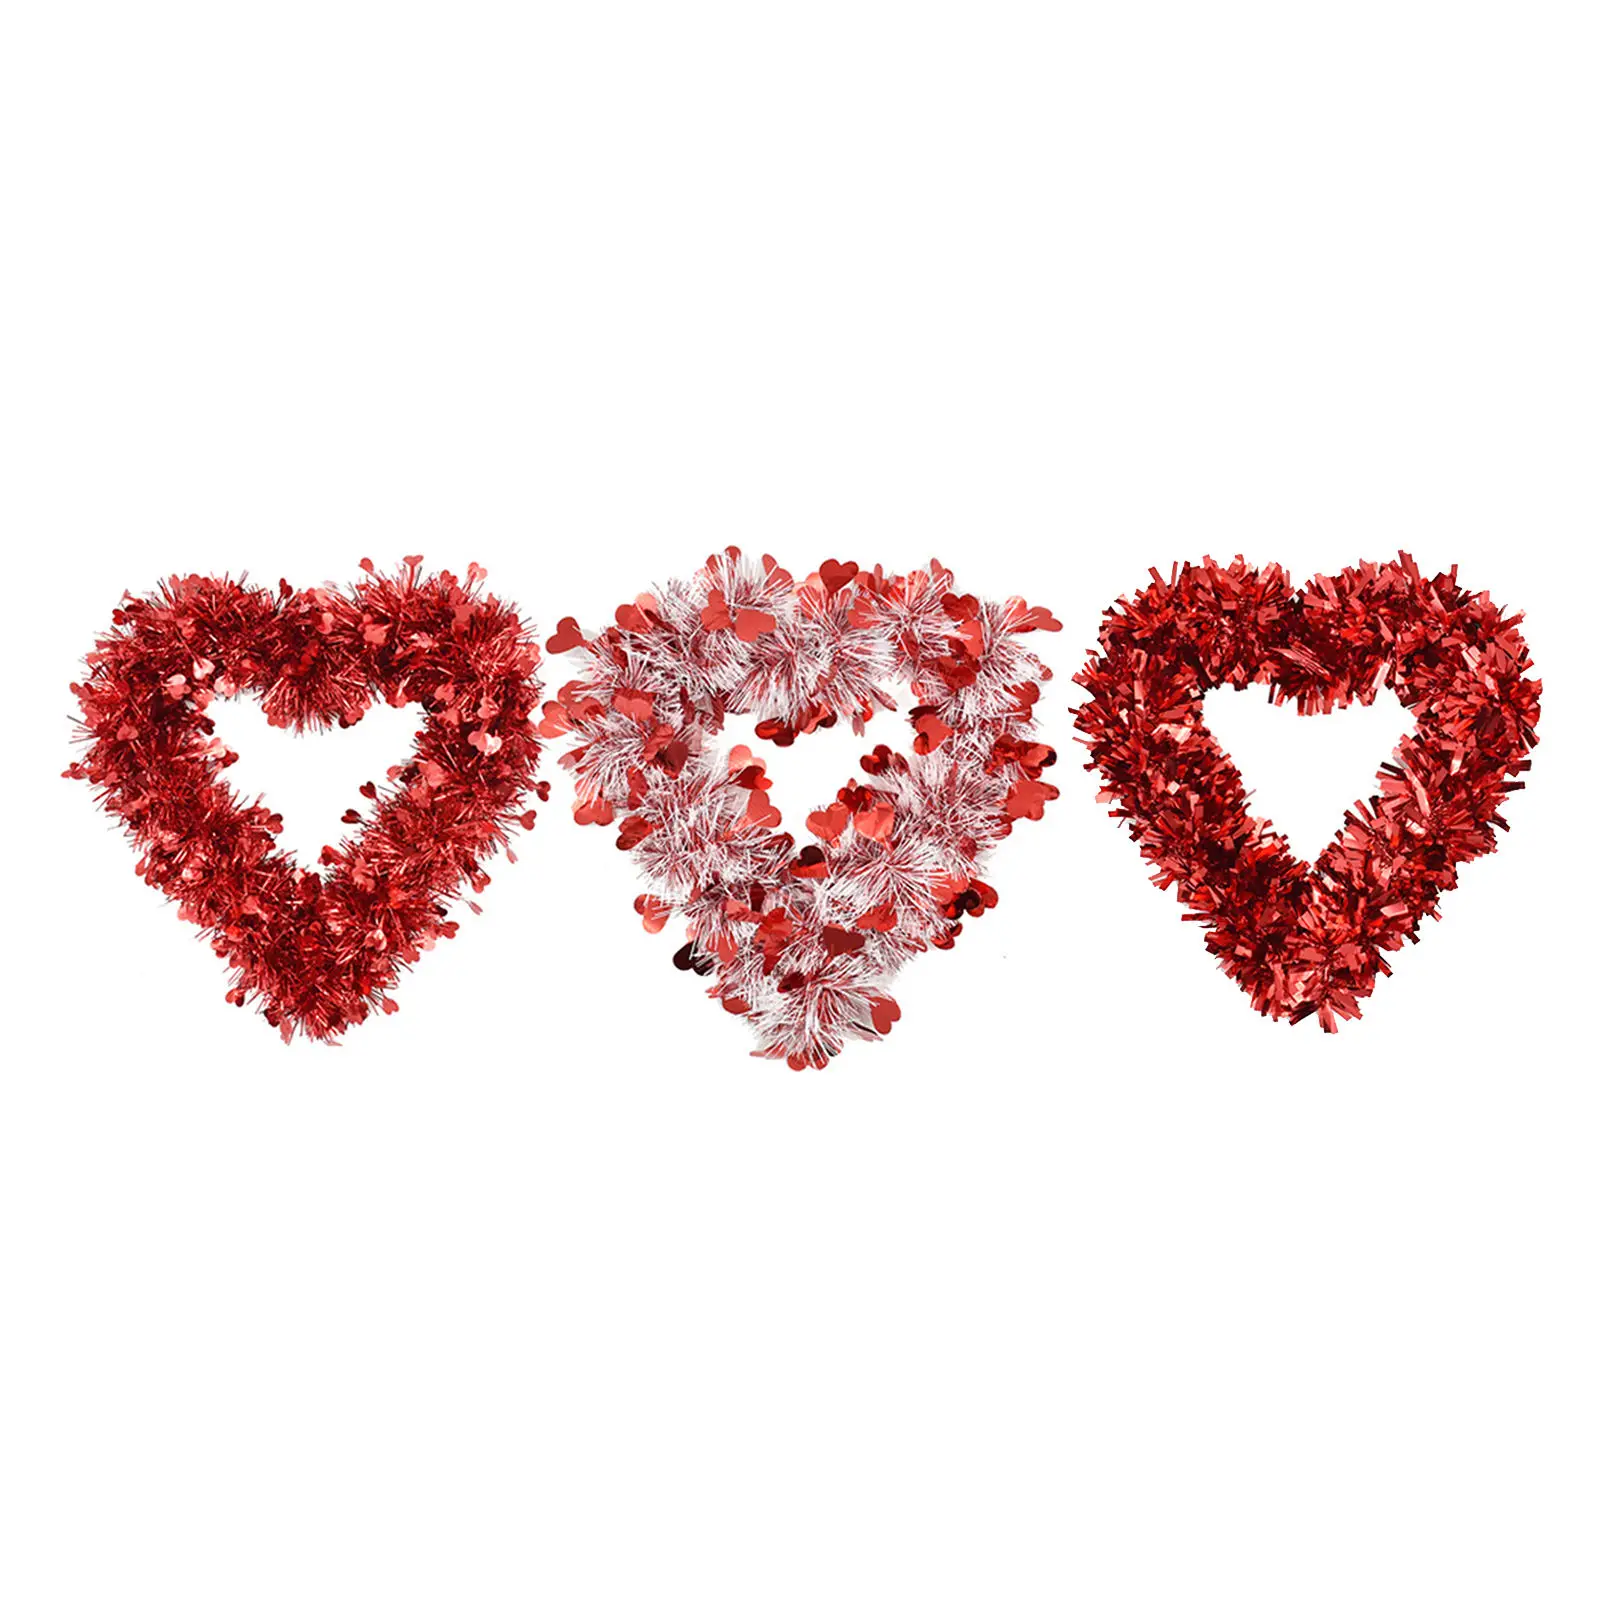 Valentine Heart Wreaths Red Tinsel Garland Decorations for Wedding Birthday Party Front Door ing Wall Window Mantel Decor